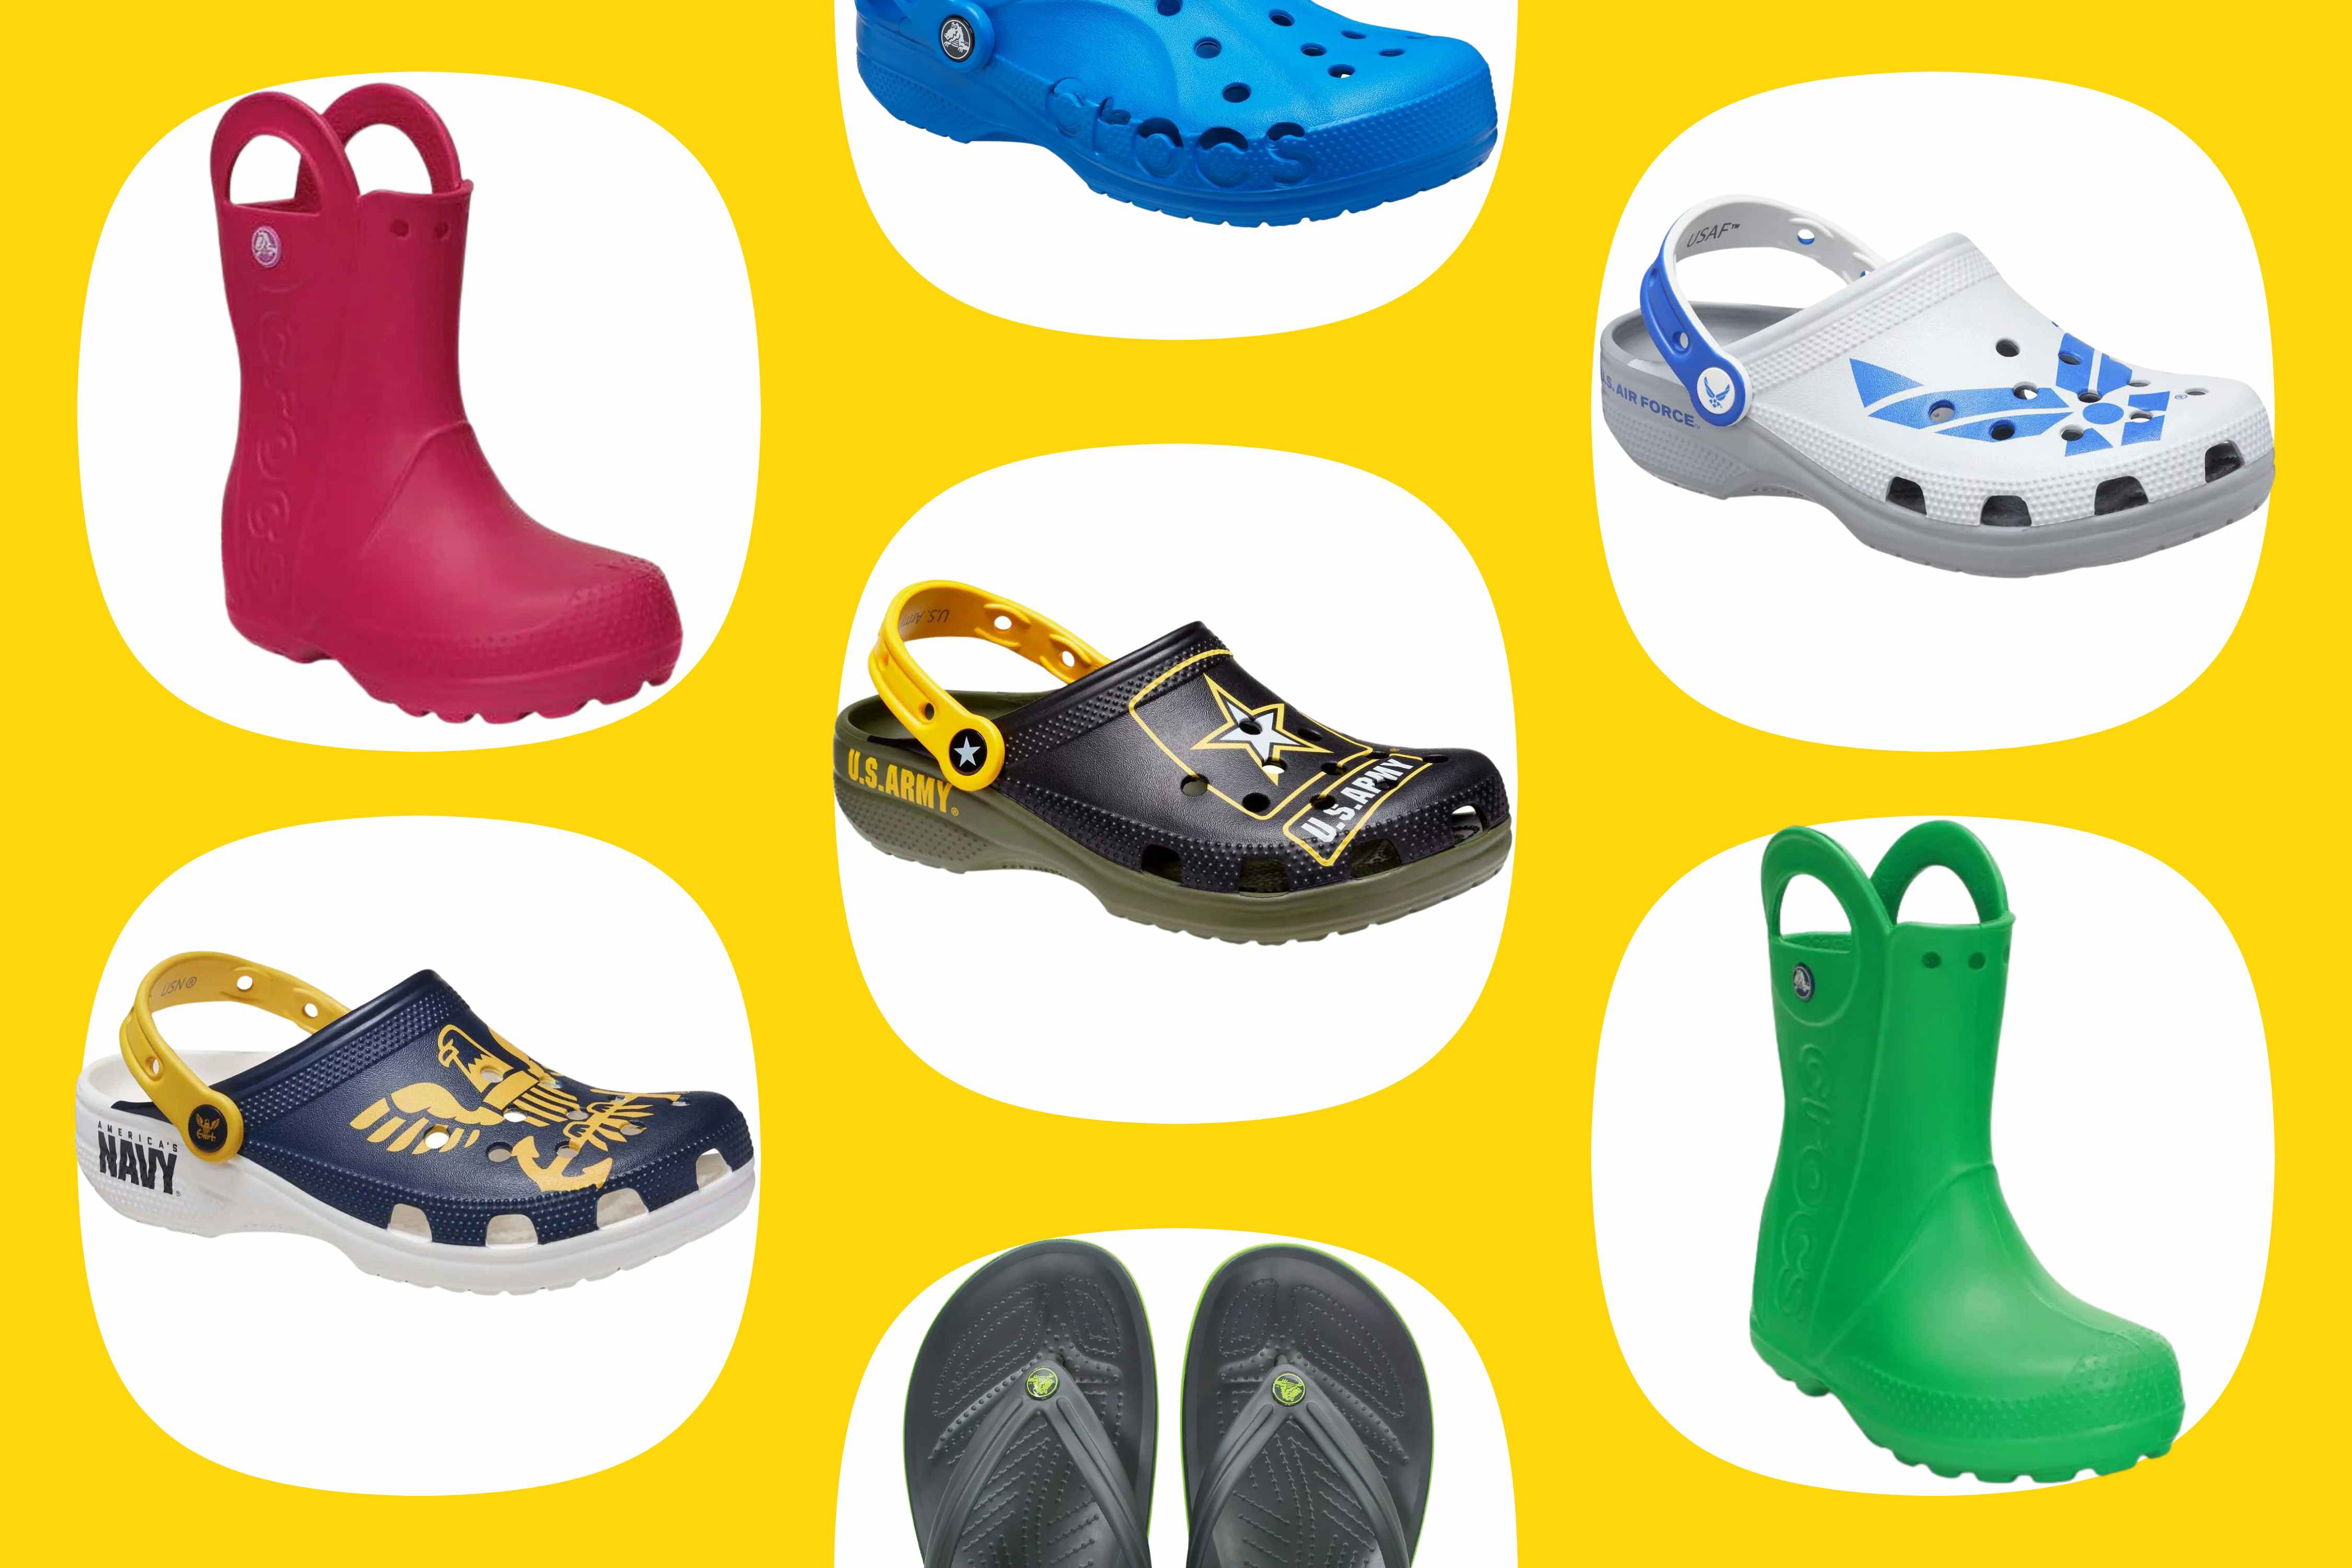 Up to 64% Off Crocs at Walmart: $15 Sandals, $25 Military Clogs